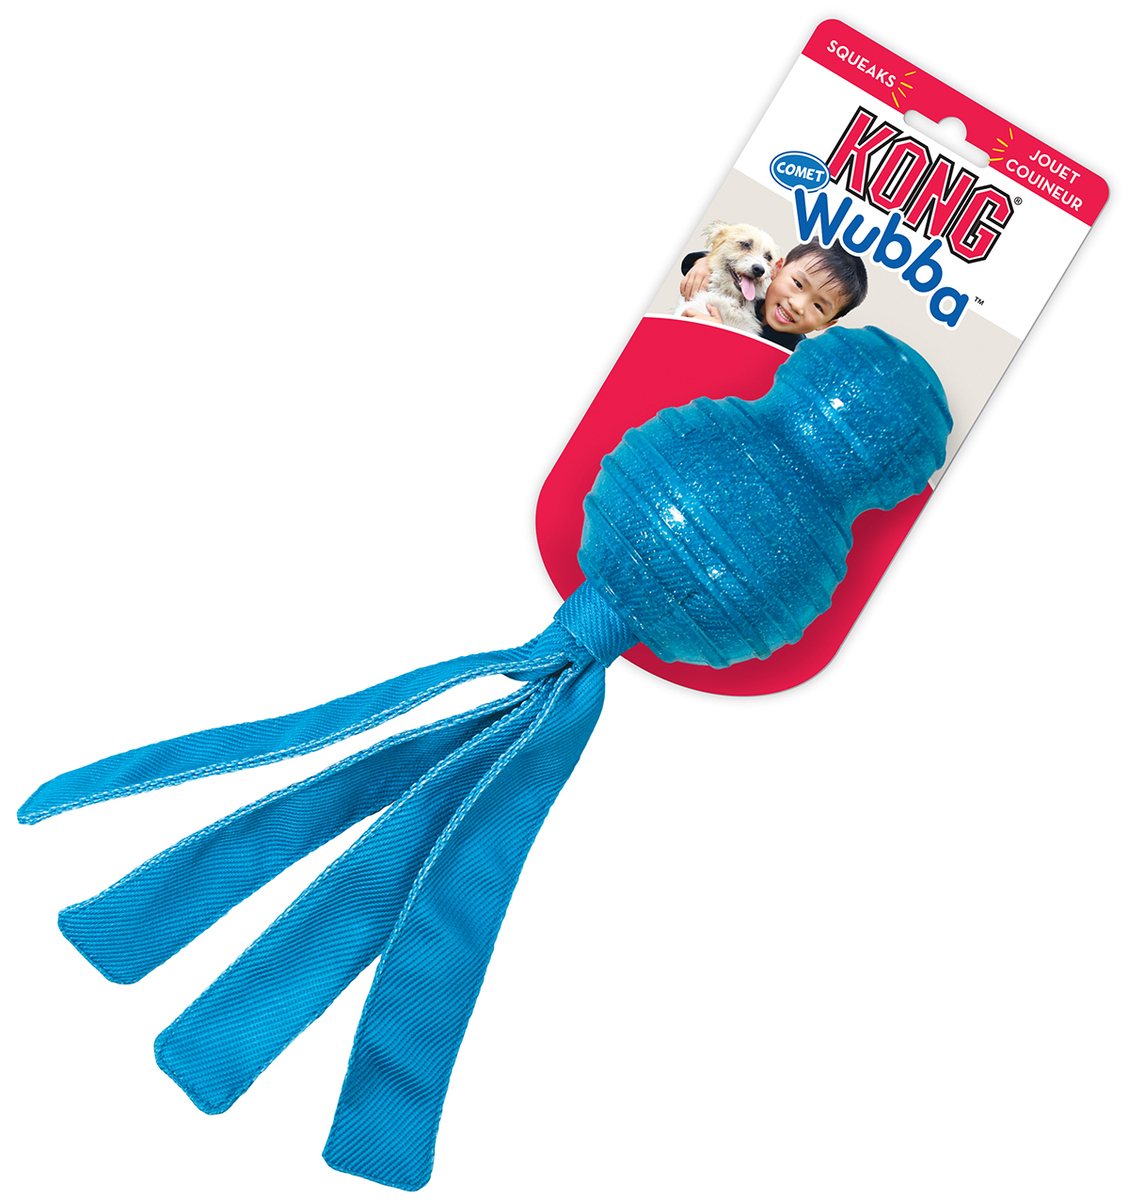 KONG Wubba Comet Dog Toy with Protective Rubber and Long Floppy Tails image 0